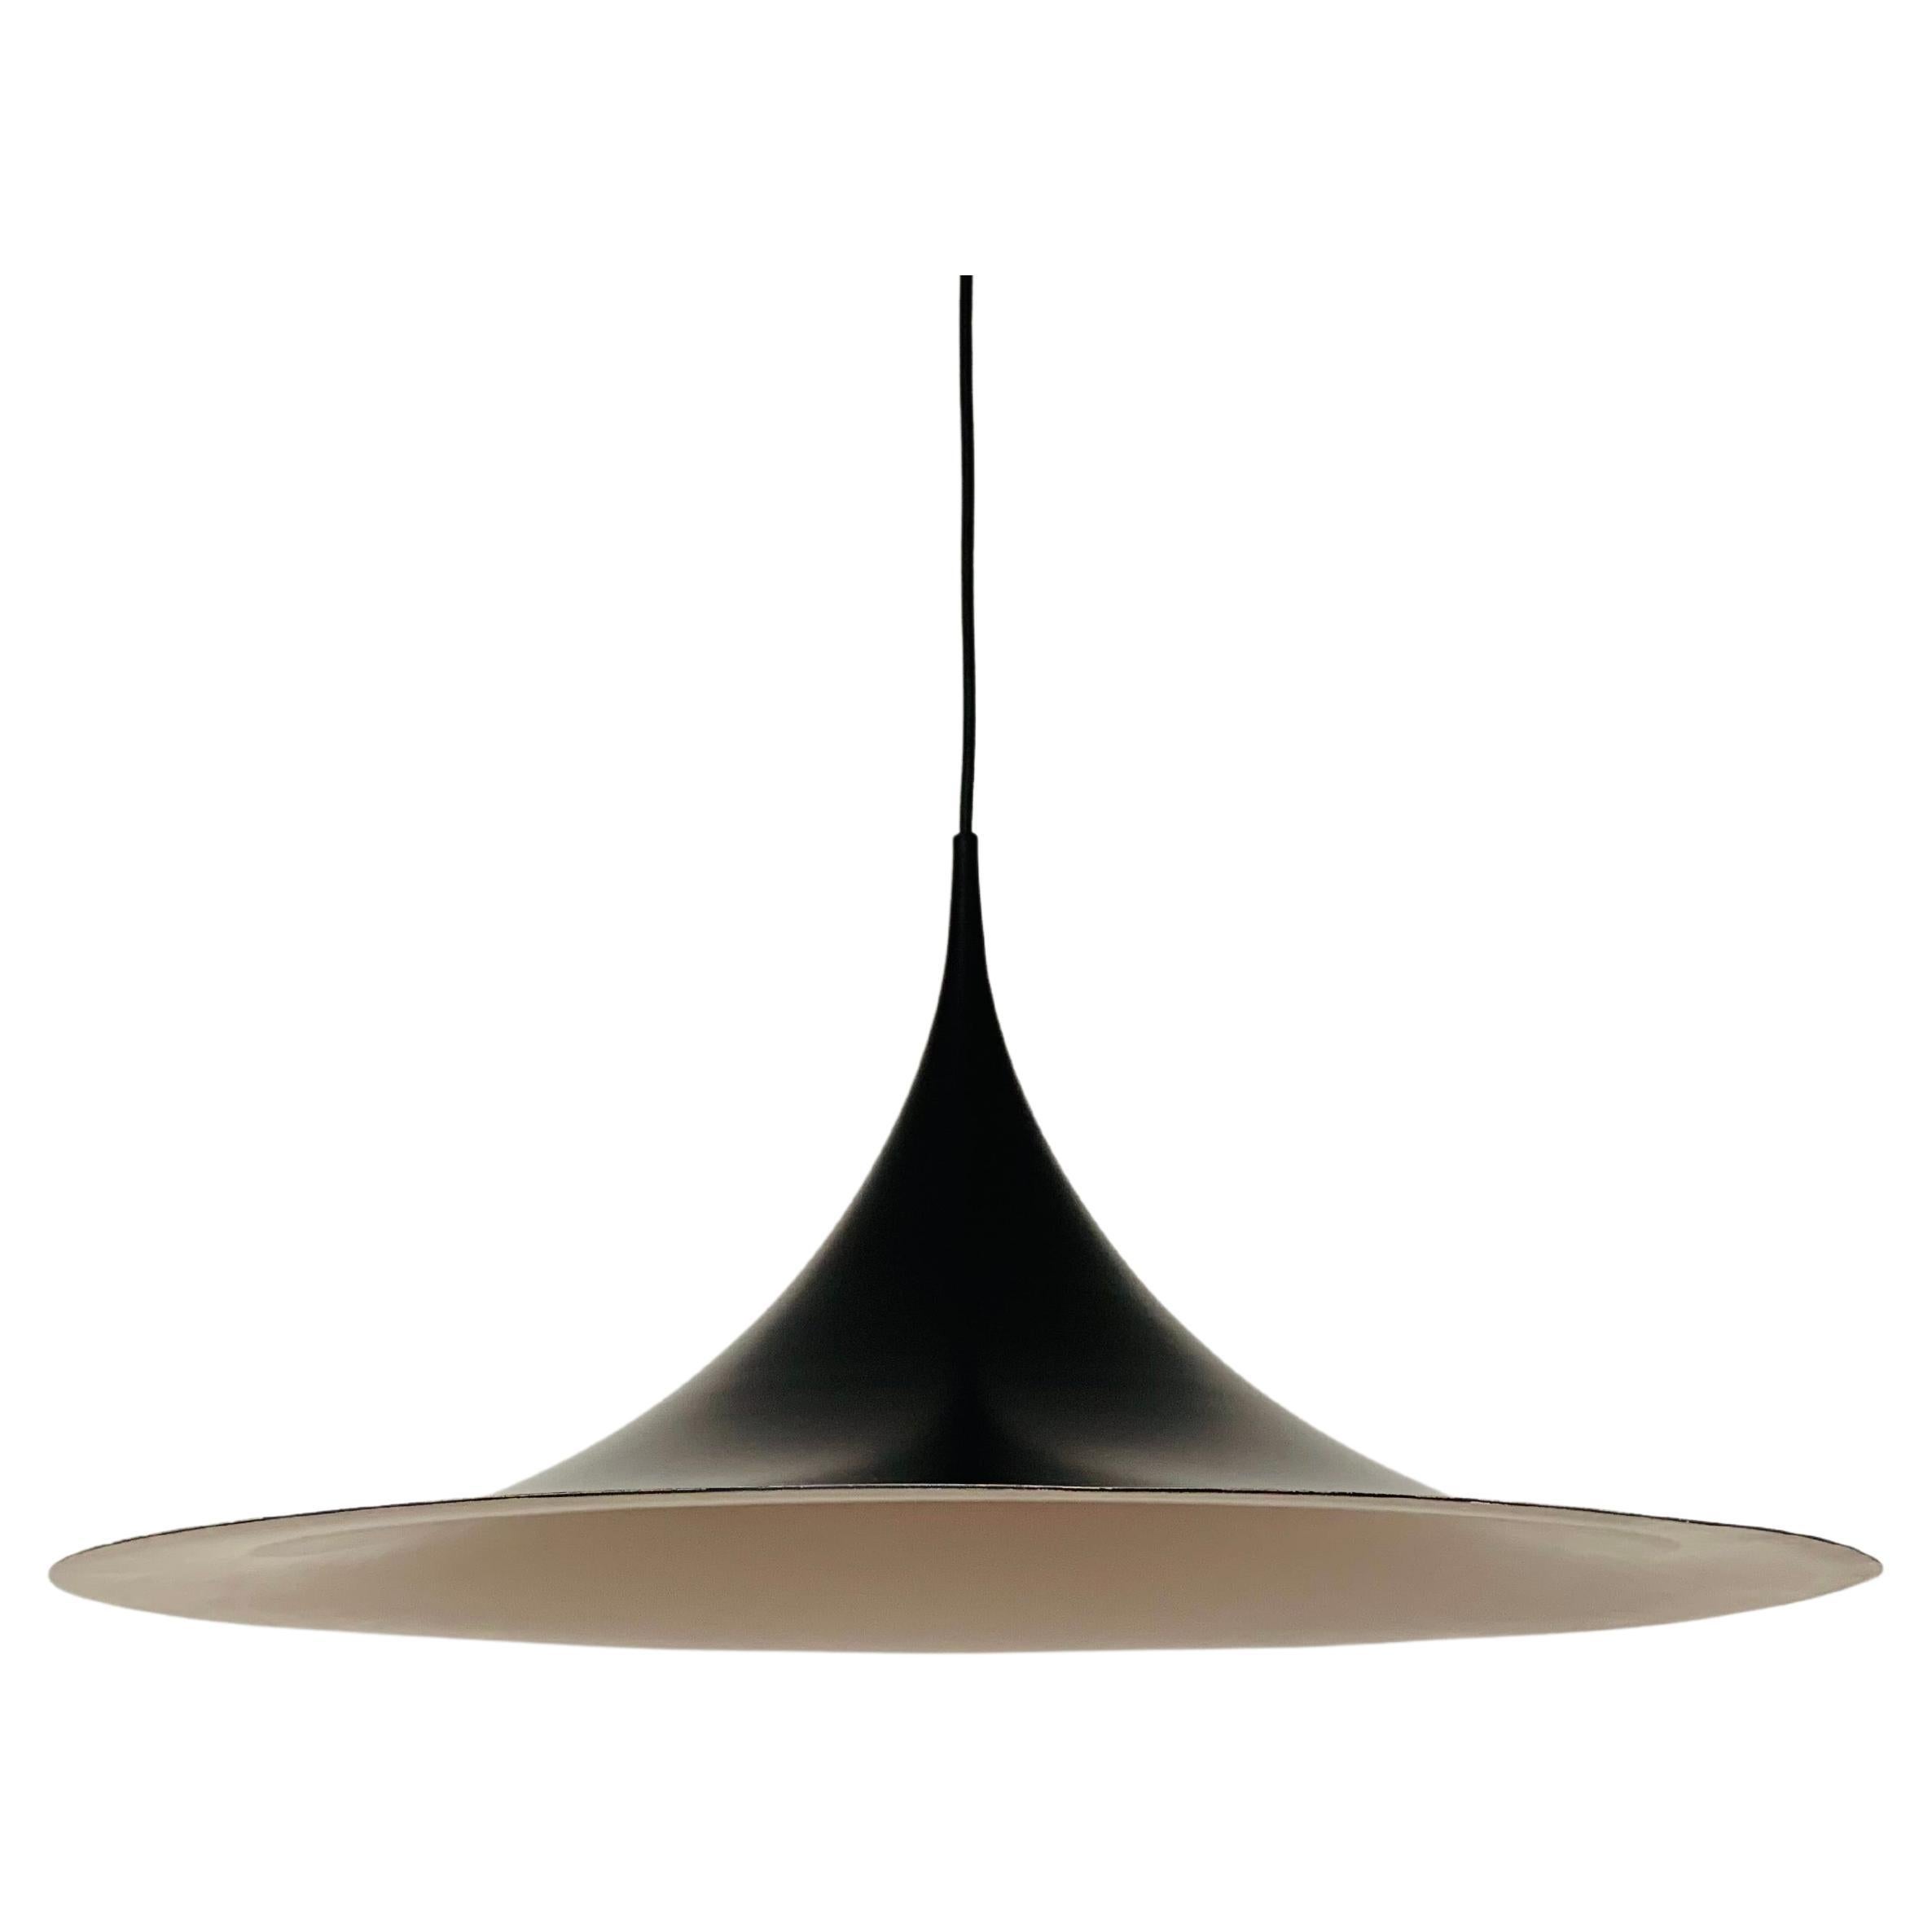 Semi pendant lamp by Bonderup and Thorup for Fog and Morup